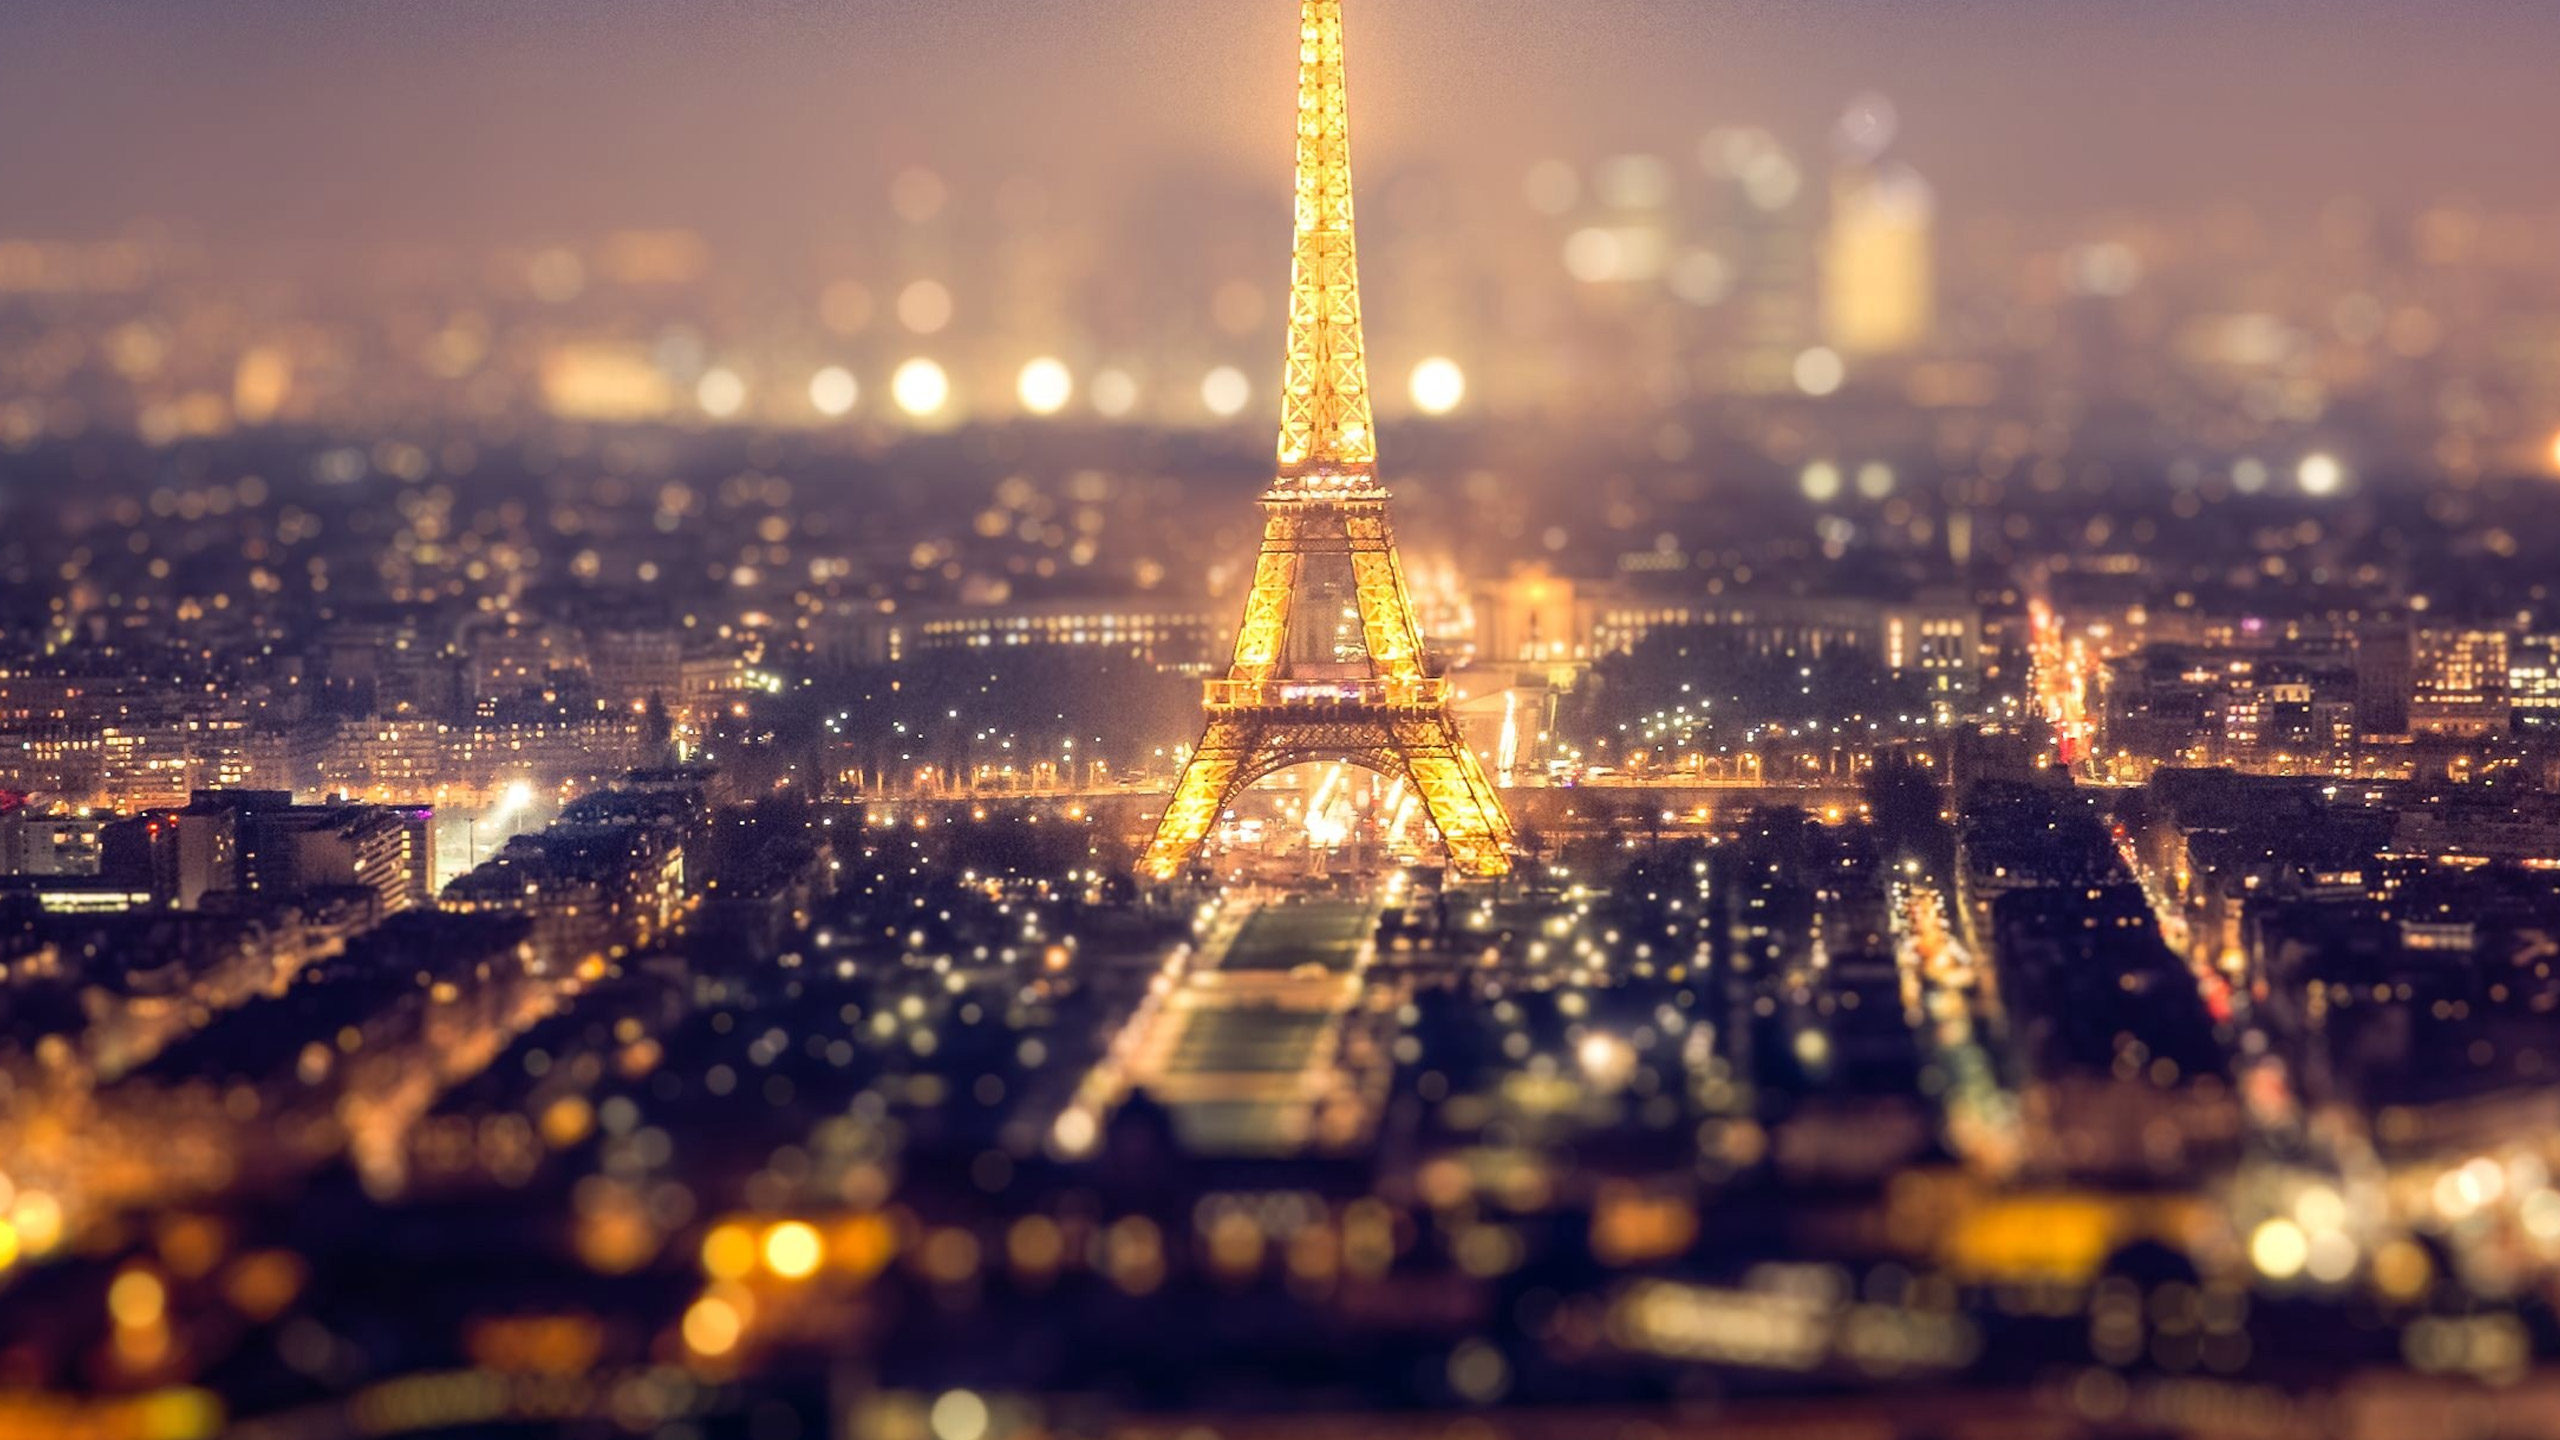 Paris At Night Amazing Backgrounds – HD Wallpapers Backgrounds Desktop, iphone & Android Free Download